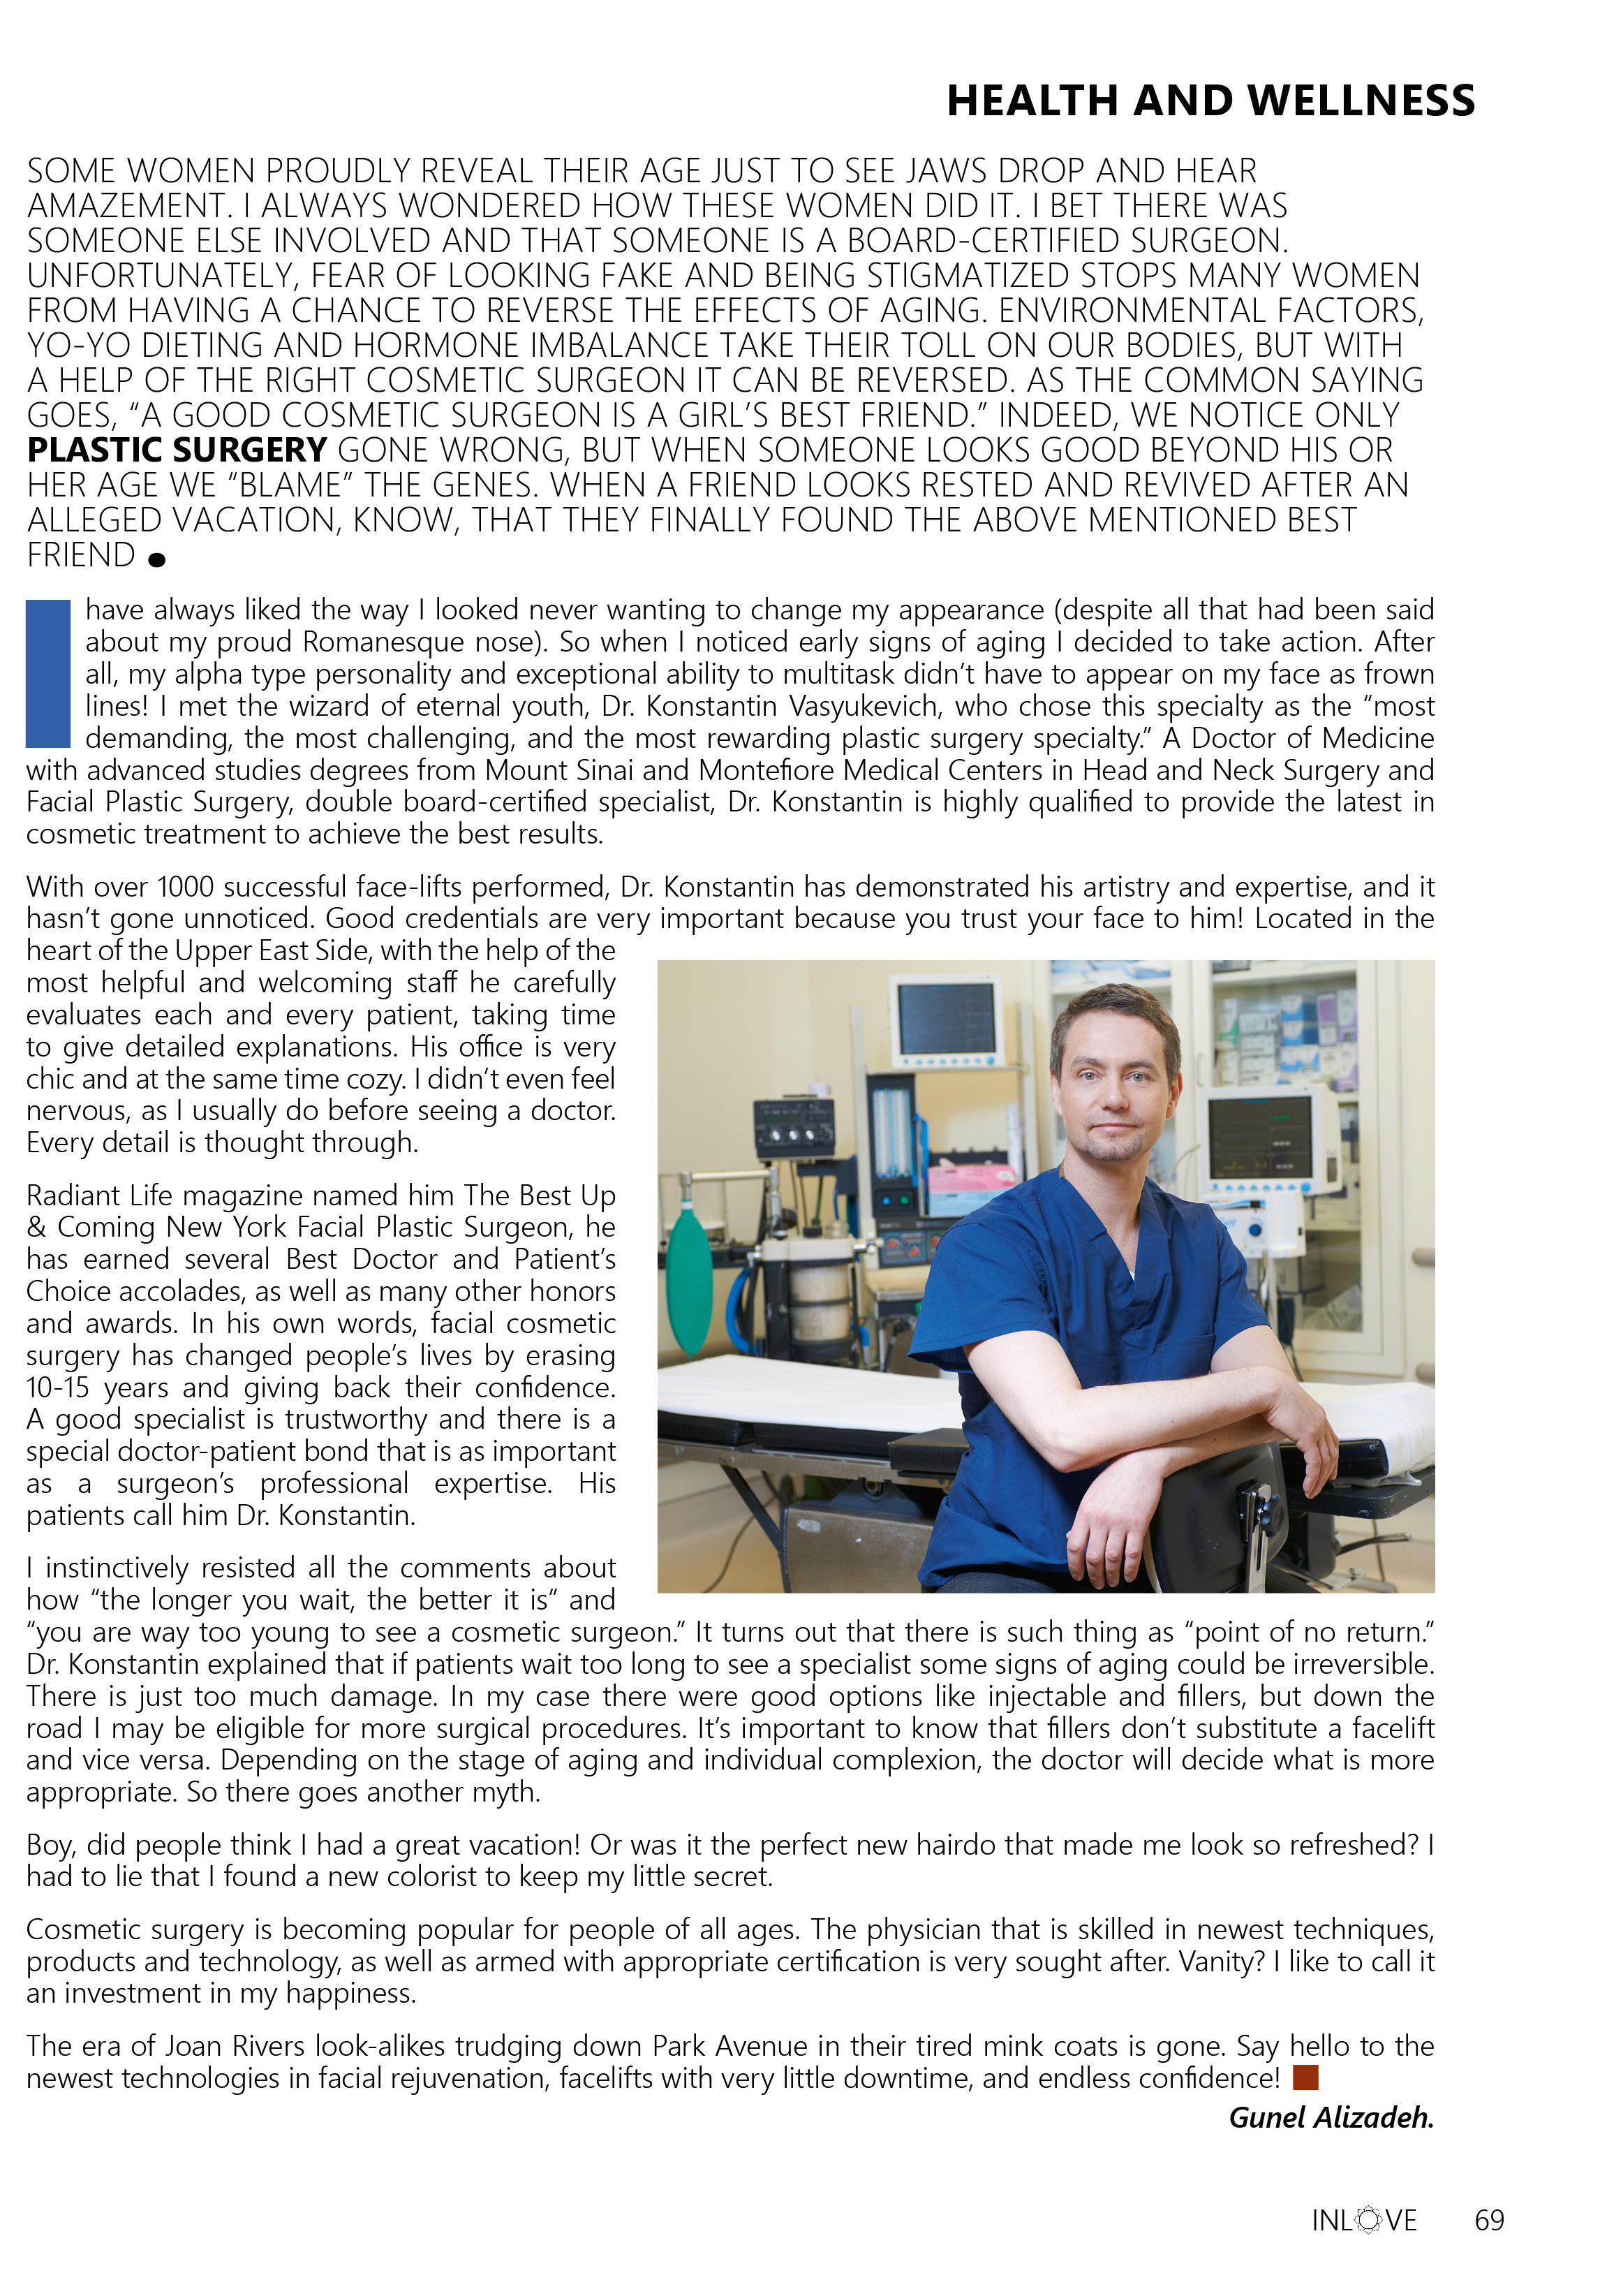 Dr. Konstantin featured in the In Love magazine